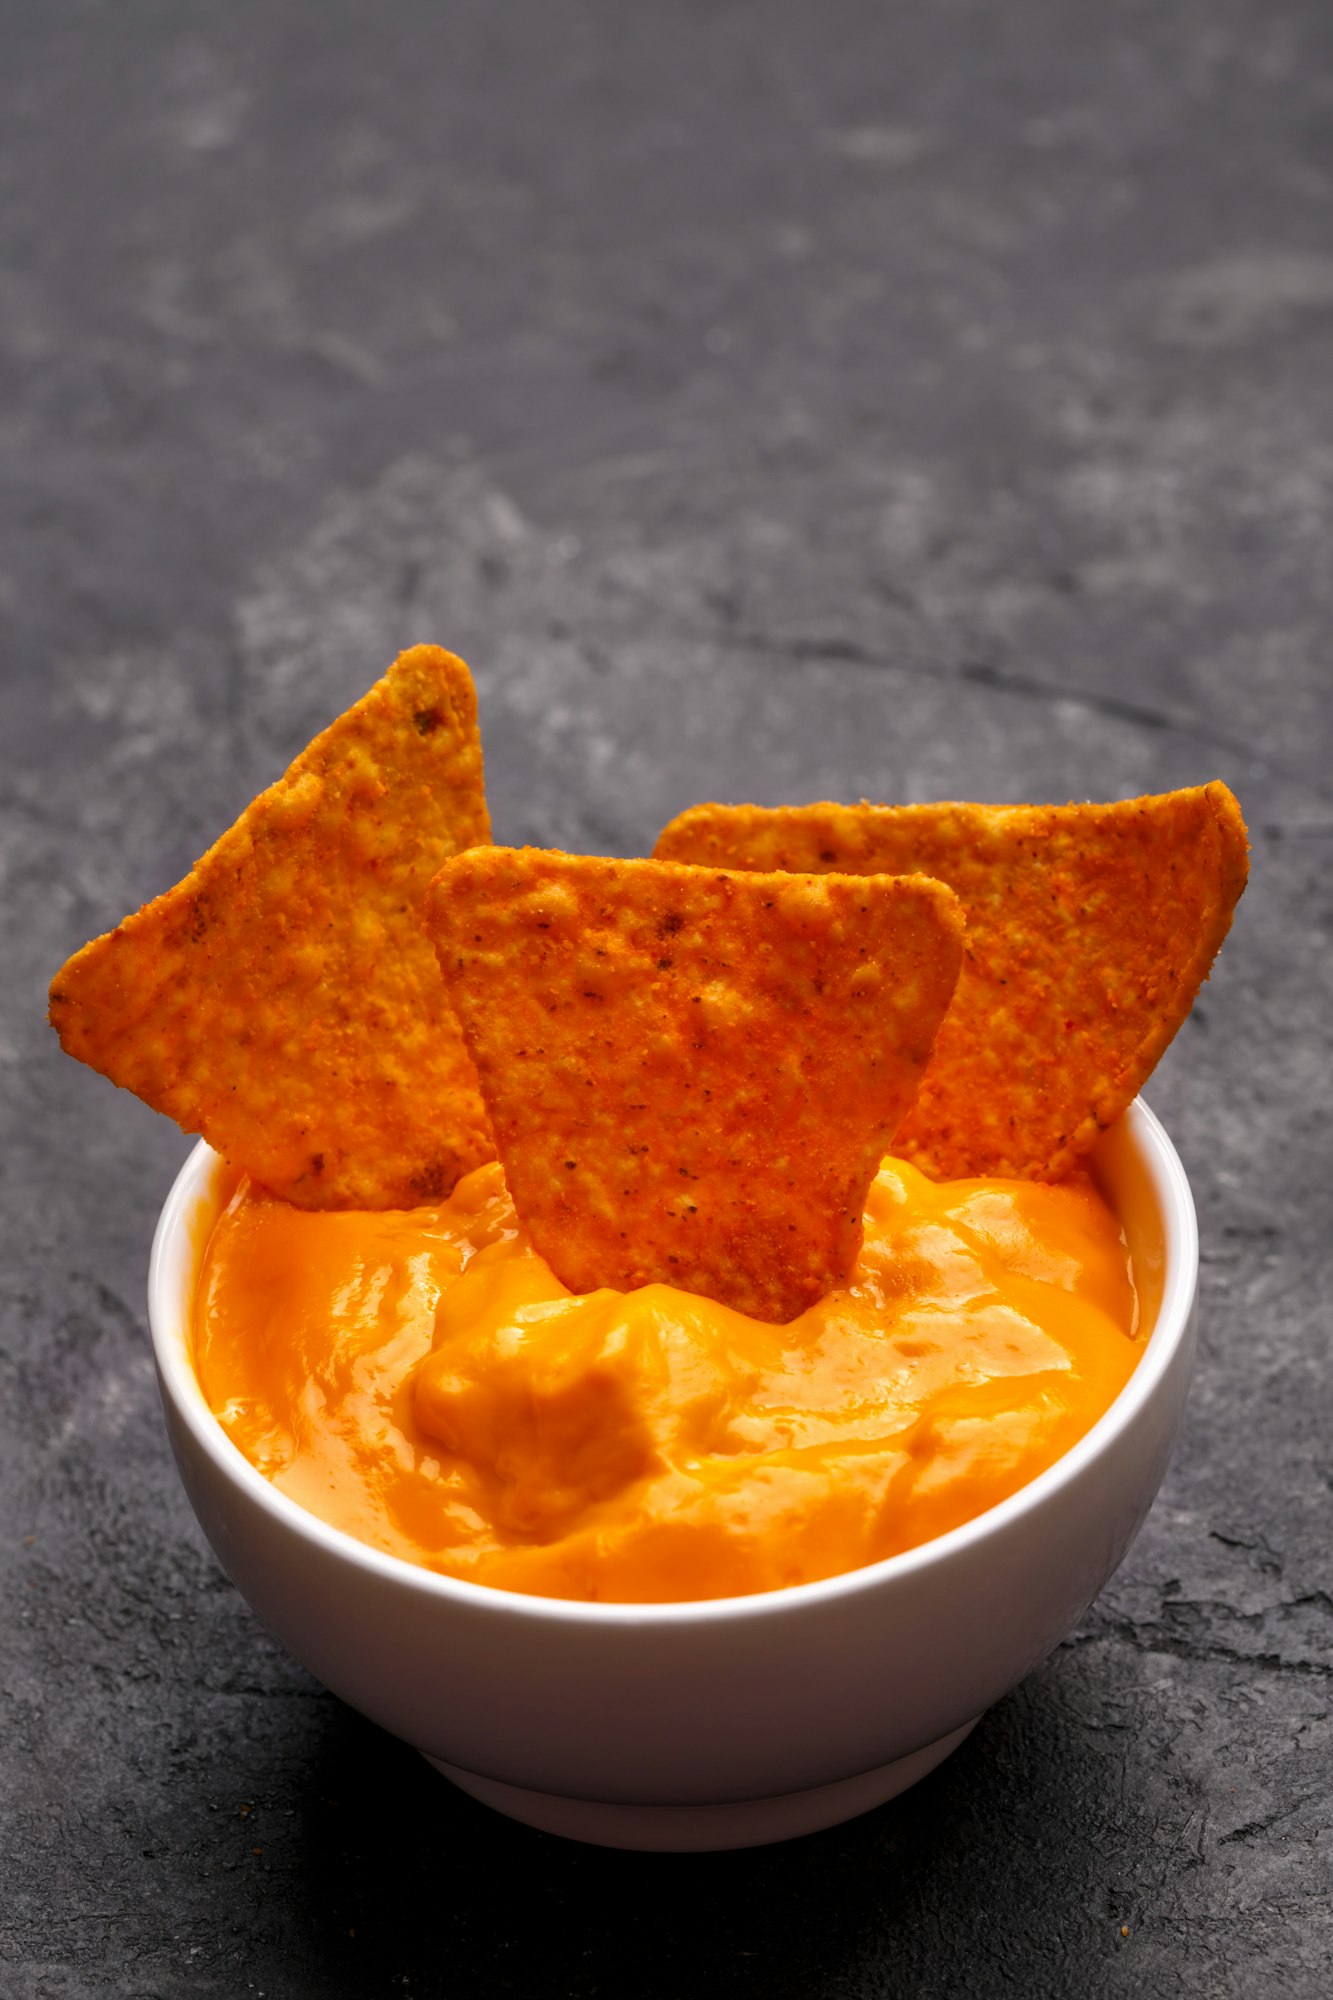 Corn chips and cheese sauce